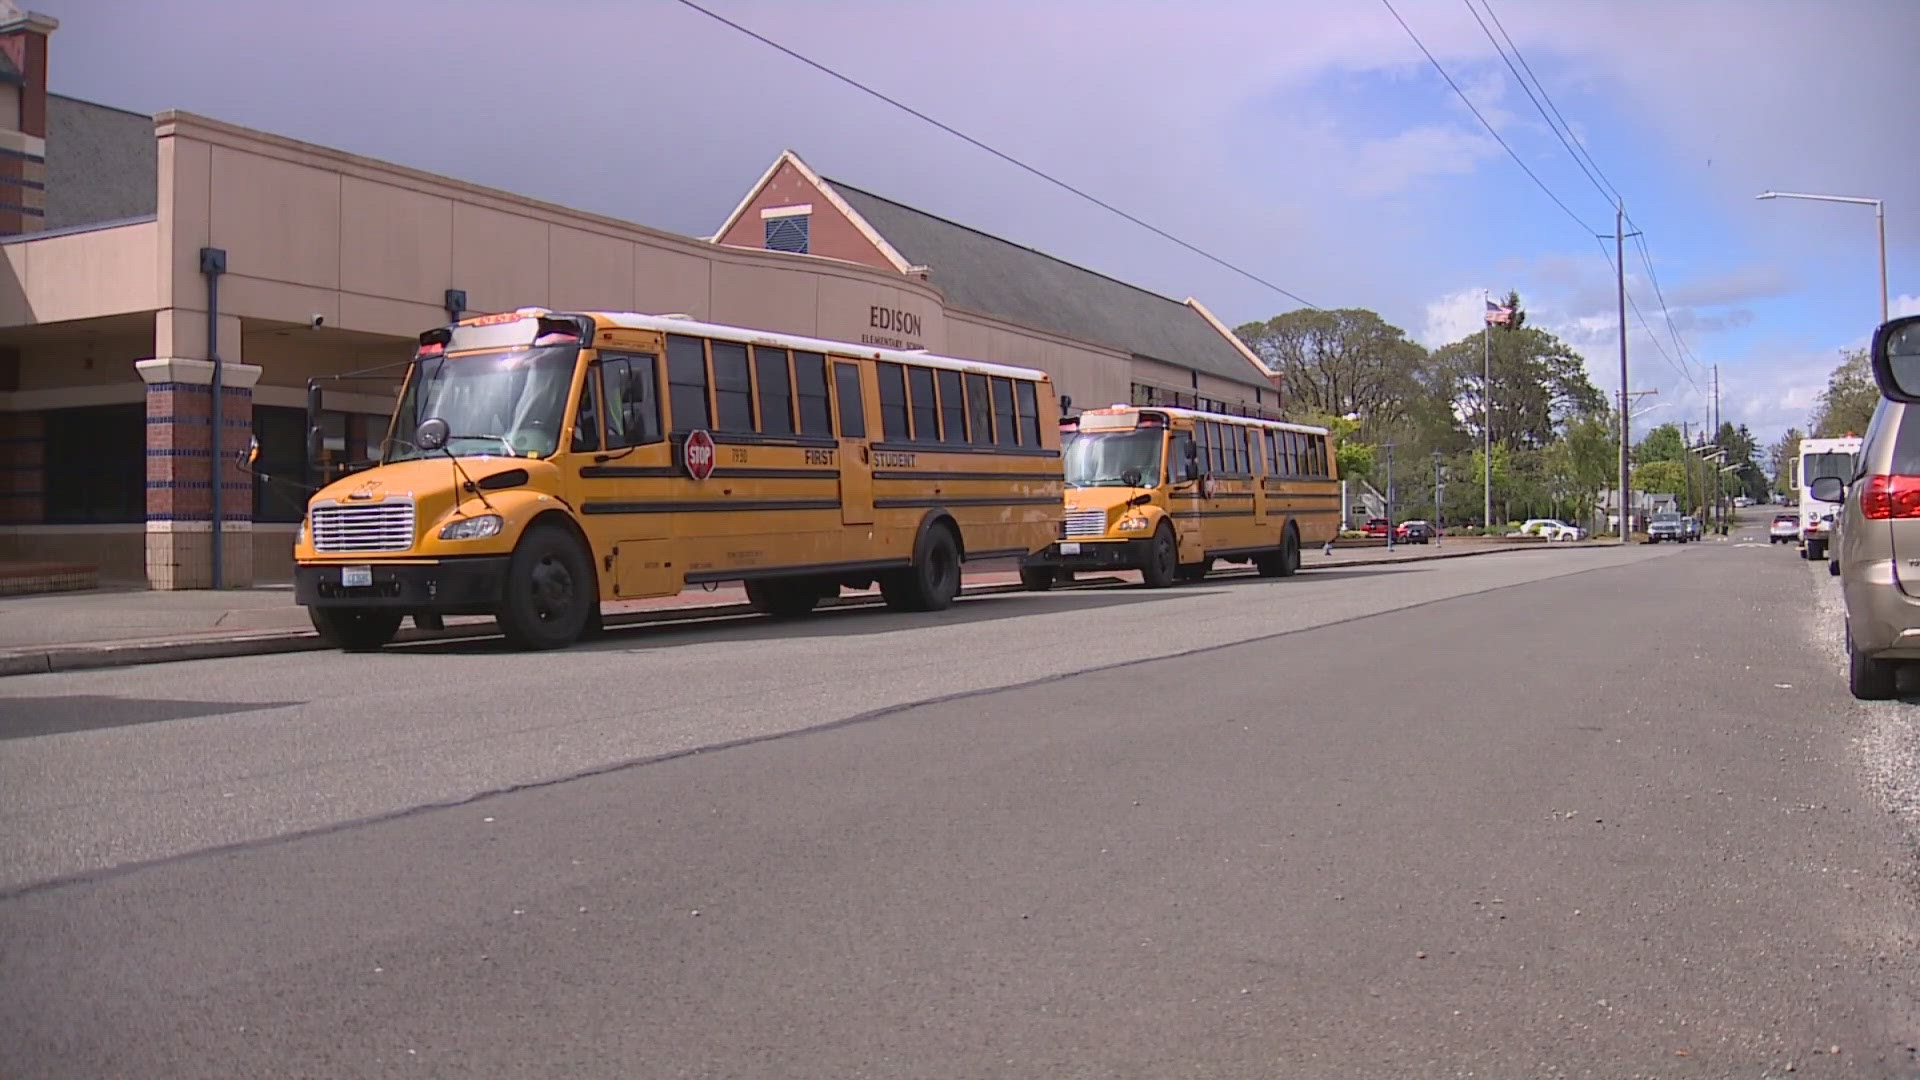 The new bell times are expected to save Tacoma Public Schools about $1 million per year due to a more efficient bus schedule.